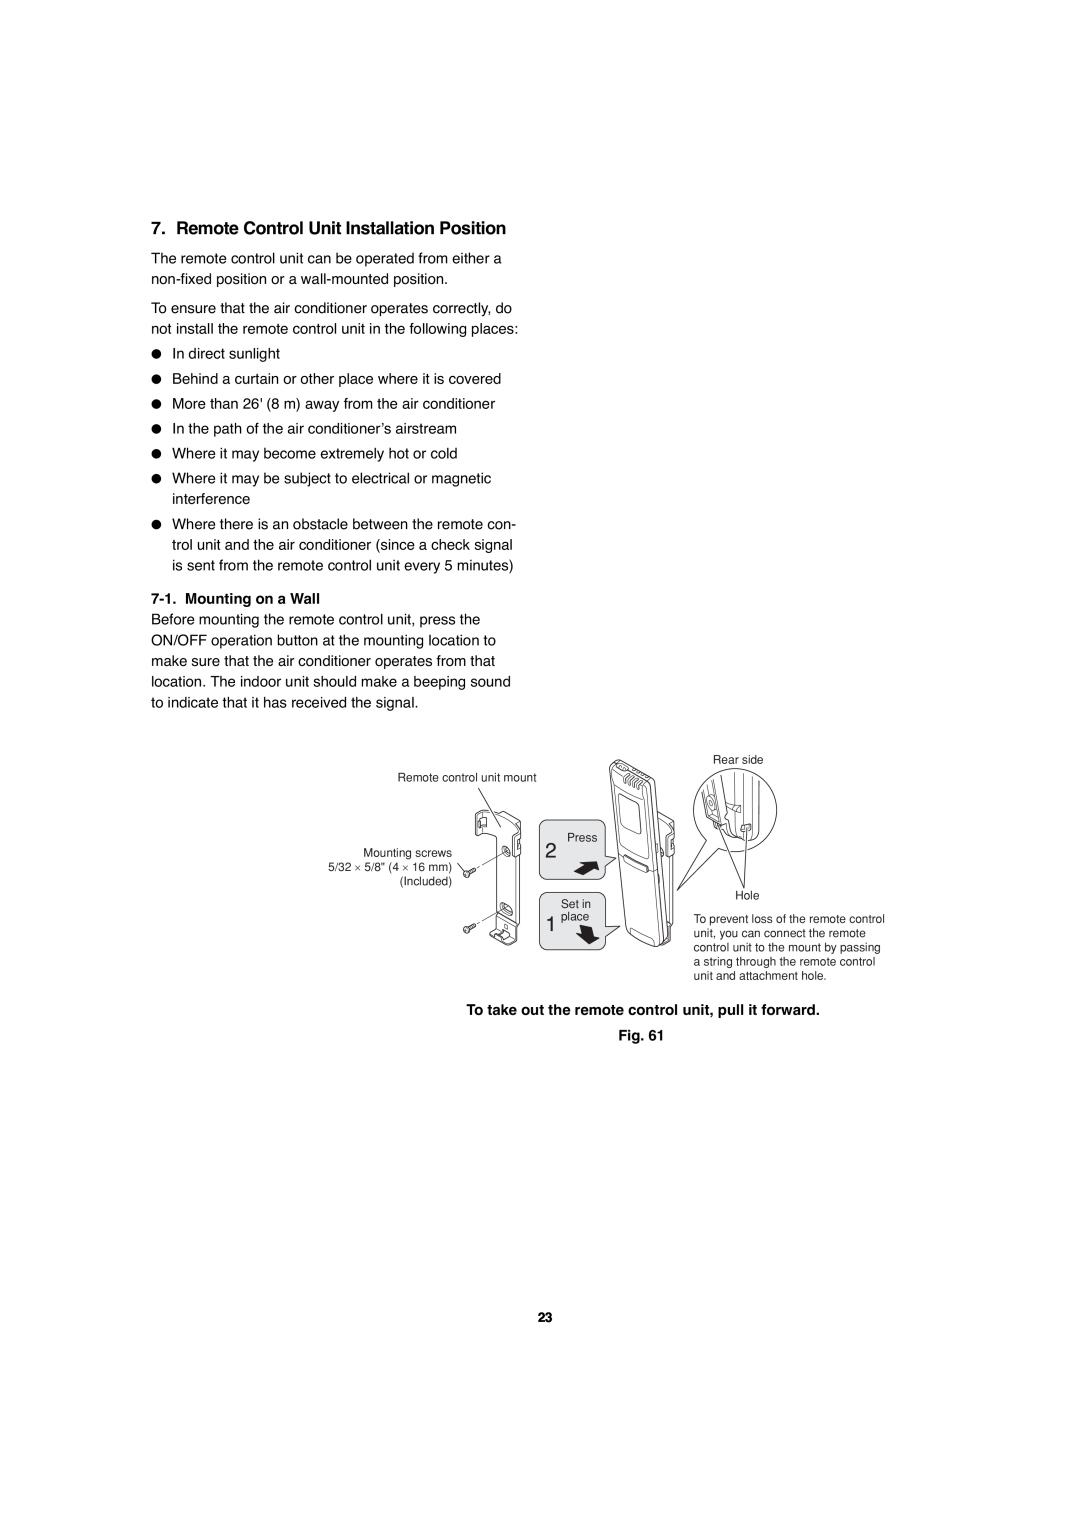 Sanyo CH1271, CH0971 service manual Remote Control Unit Installation Position, Mounting on a Wall 